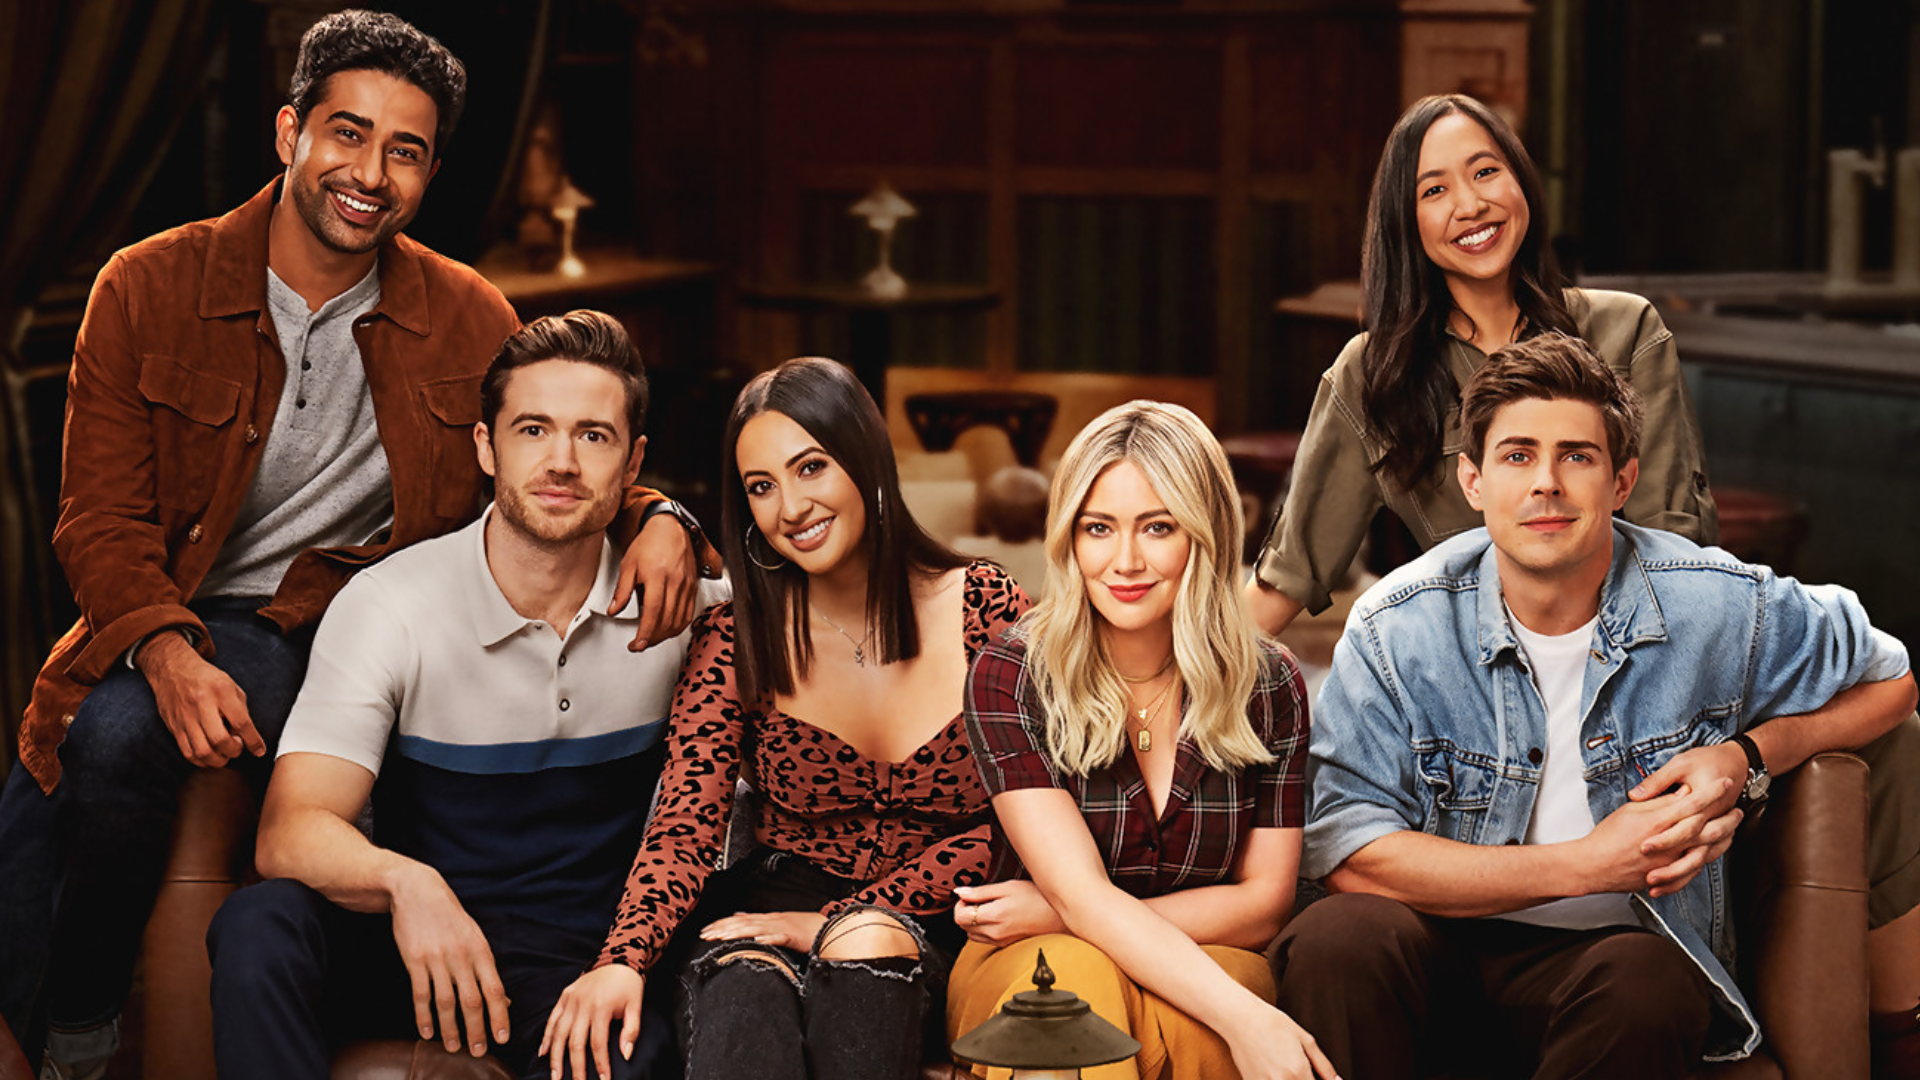 How I Met Your Father : Hilary Duff galère en amour dans le trailer du spin-off d'How I Met Your Mother